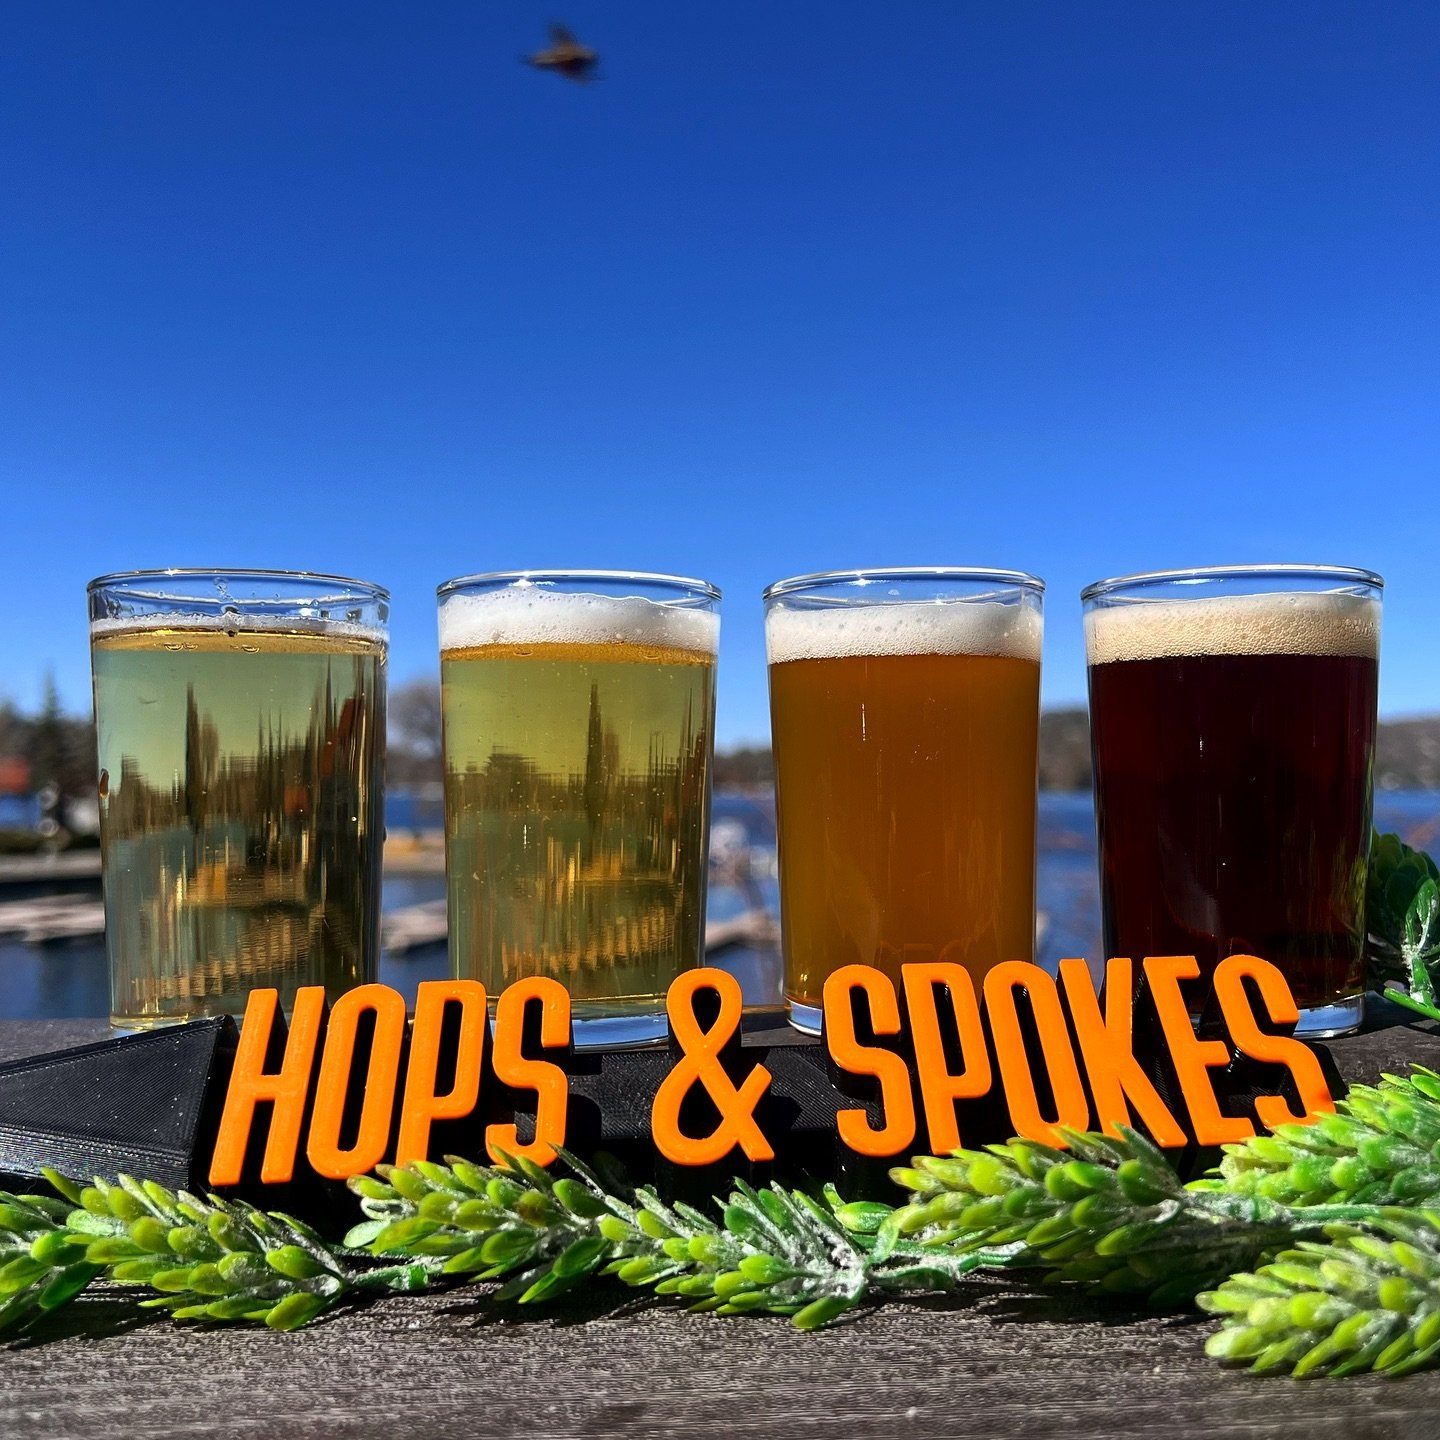 🍻 Have you all been enjoying our #TapTakeover of the month, with @hopsandspokesbrewingcompany?! Which one is your favorite so far- the Hard Apple Cider, the Mexican Lager, the Blonde Ale or the Mild Brown Ale? 

🚲 Located in the heart of downtown Y